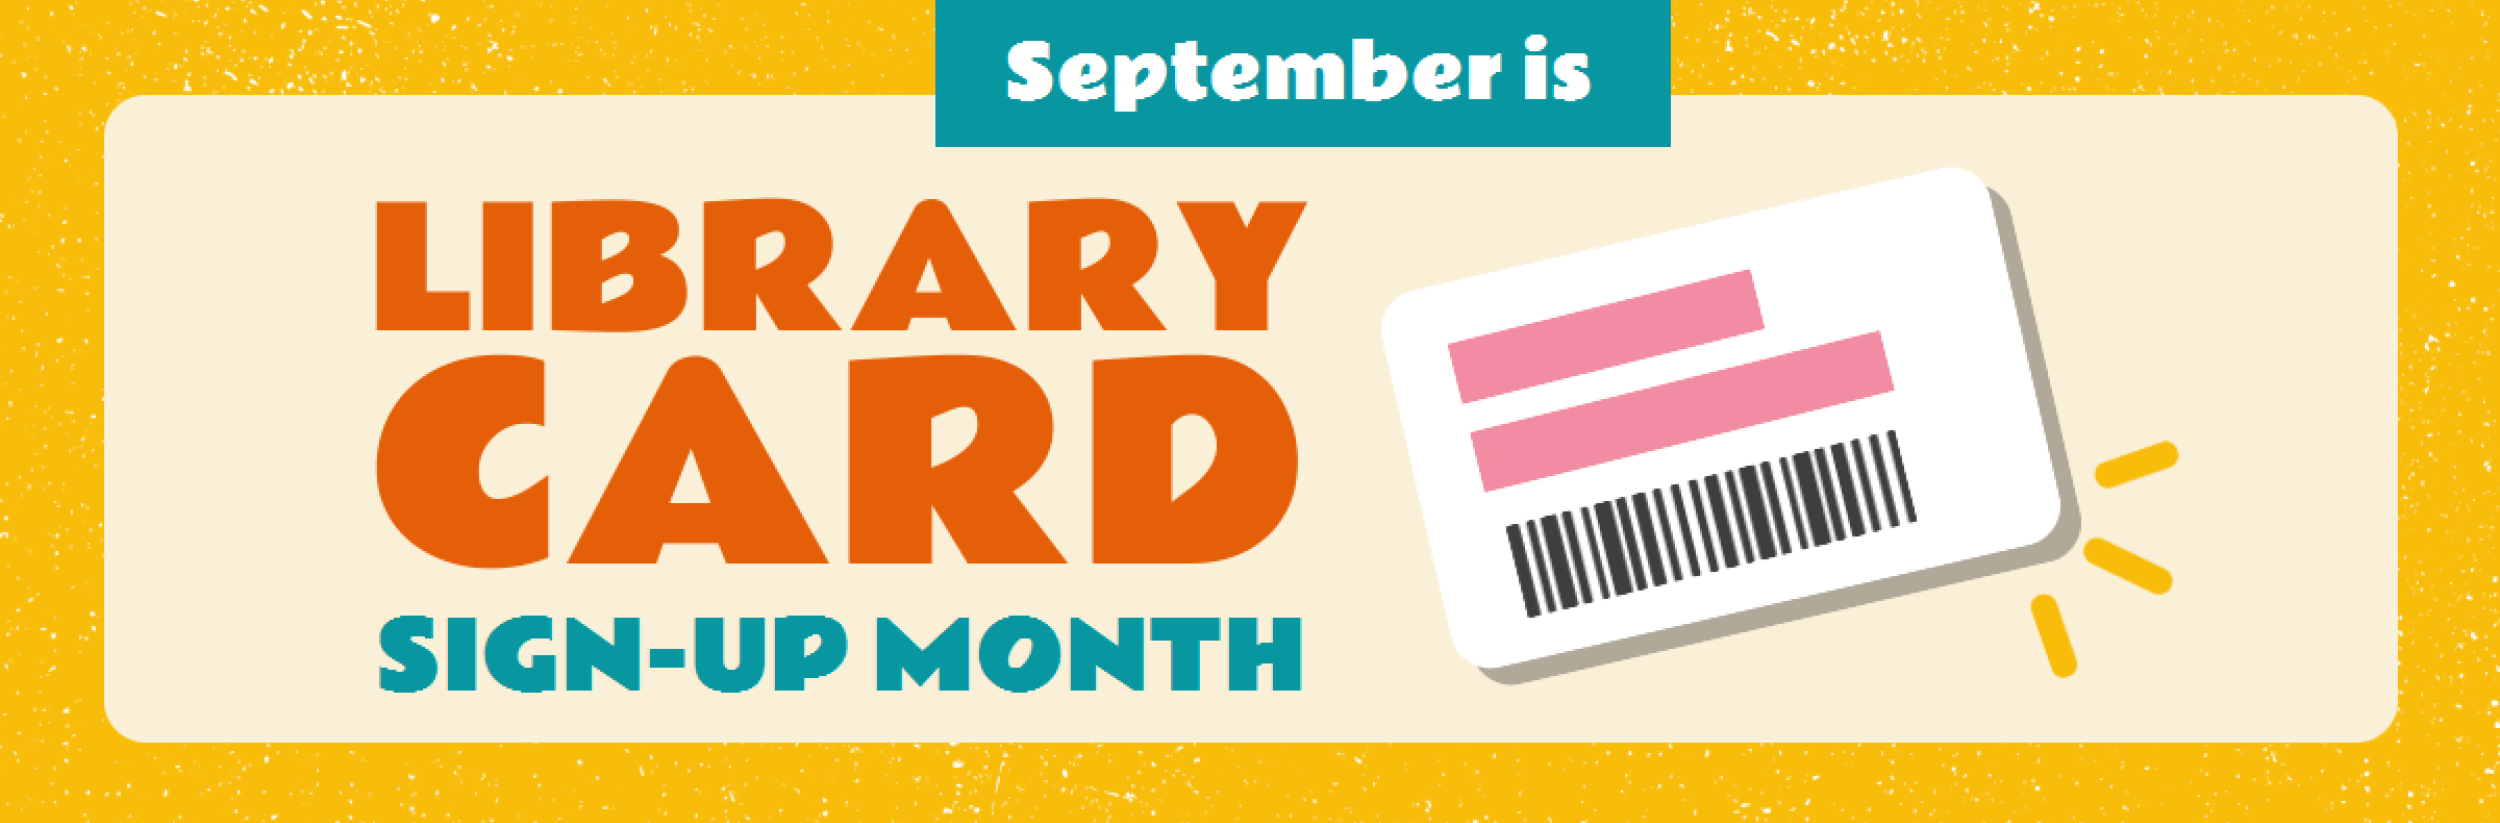 Image for "September is Library Card Sign Up Month"